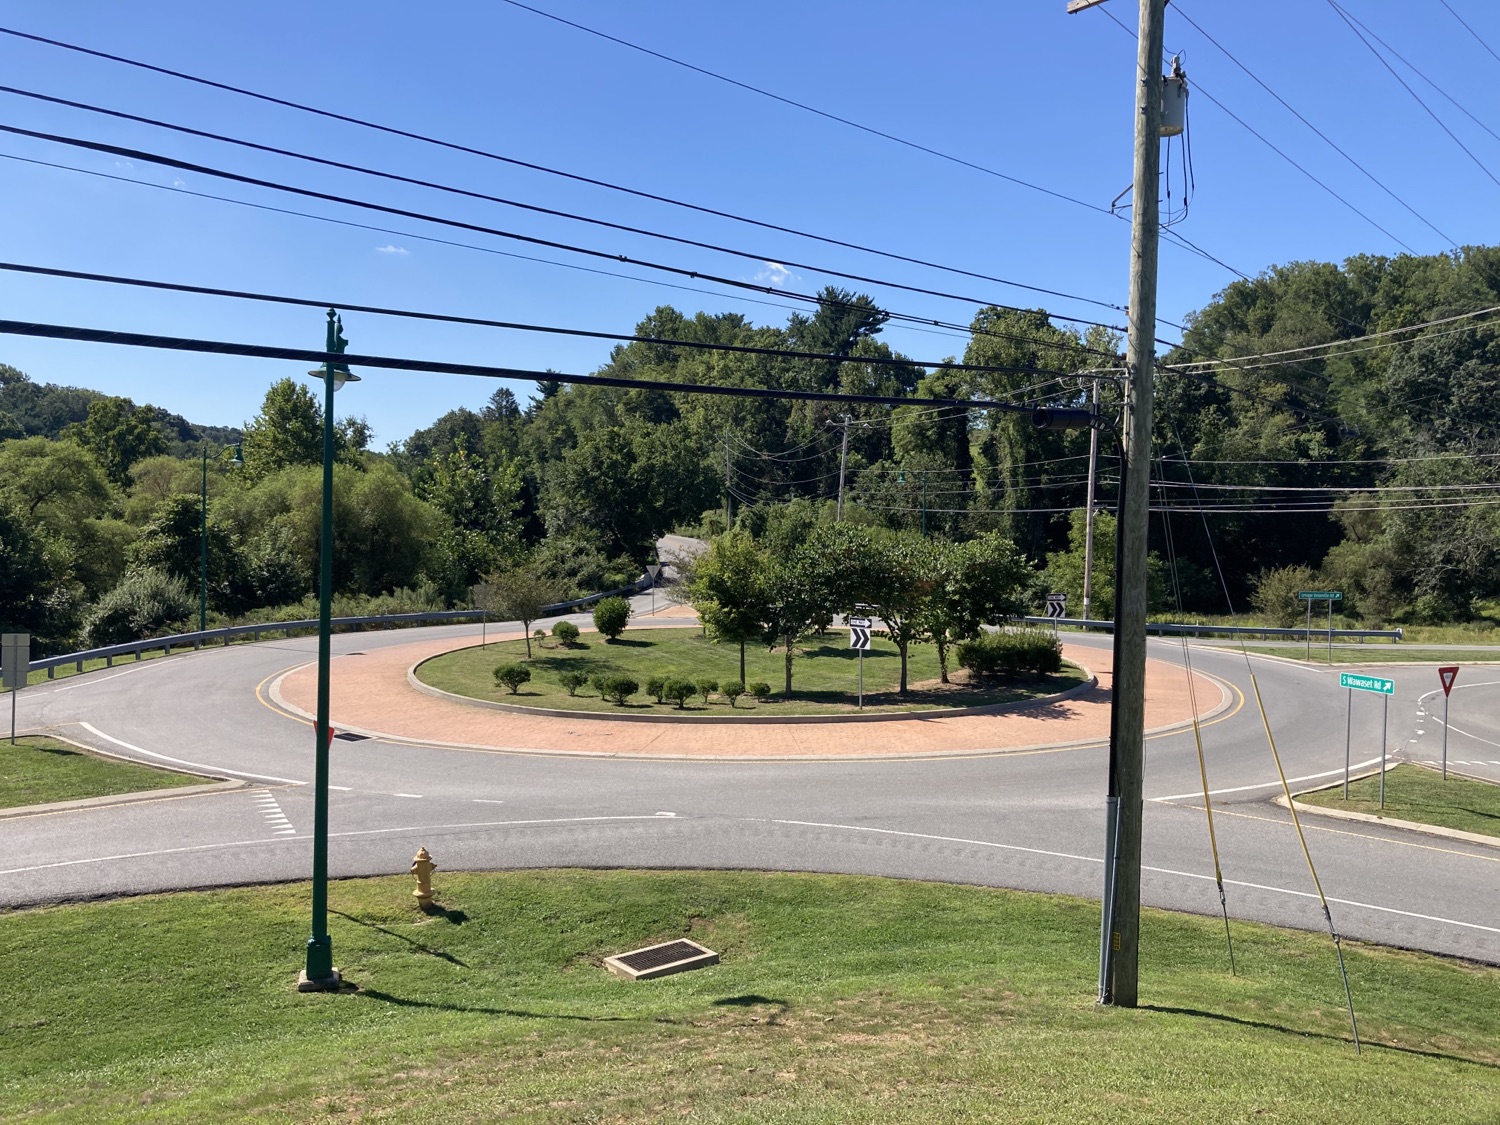 Route 52 (Lenape Road), S. Wawaset Road and Lenape Unionville Road<br><a href="https://filesource.amperwave.net/commonwealthofpa/photo/22209_dot_roundabout_photo_9.jpg" target="_blank">⇣ Download Photo</a>